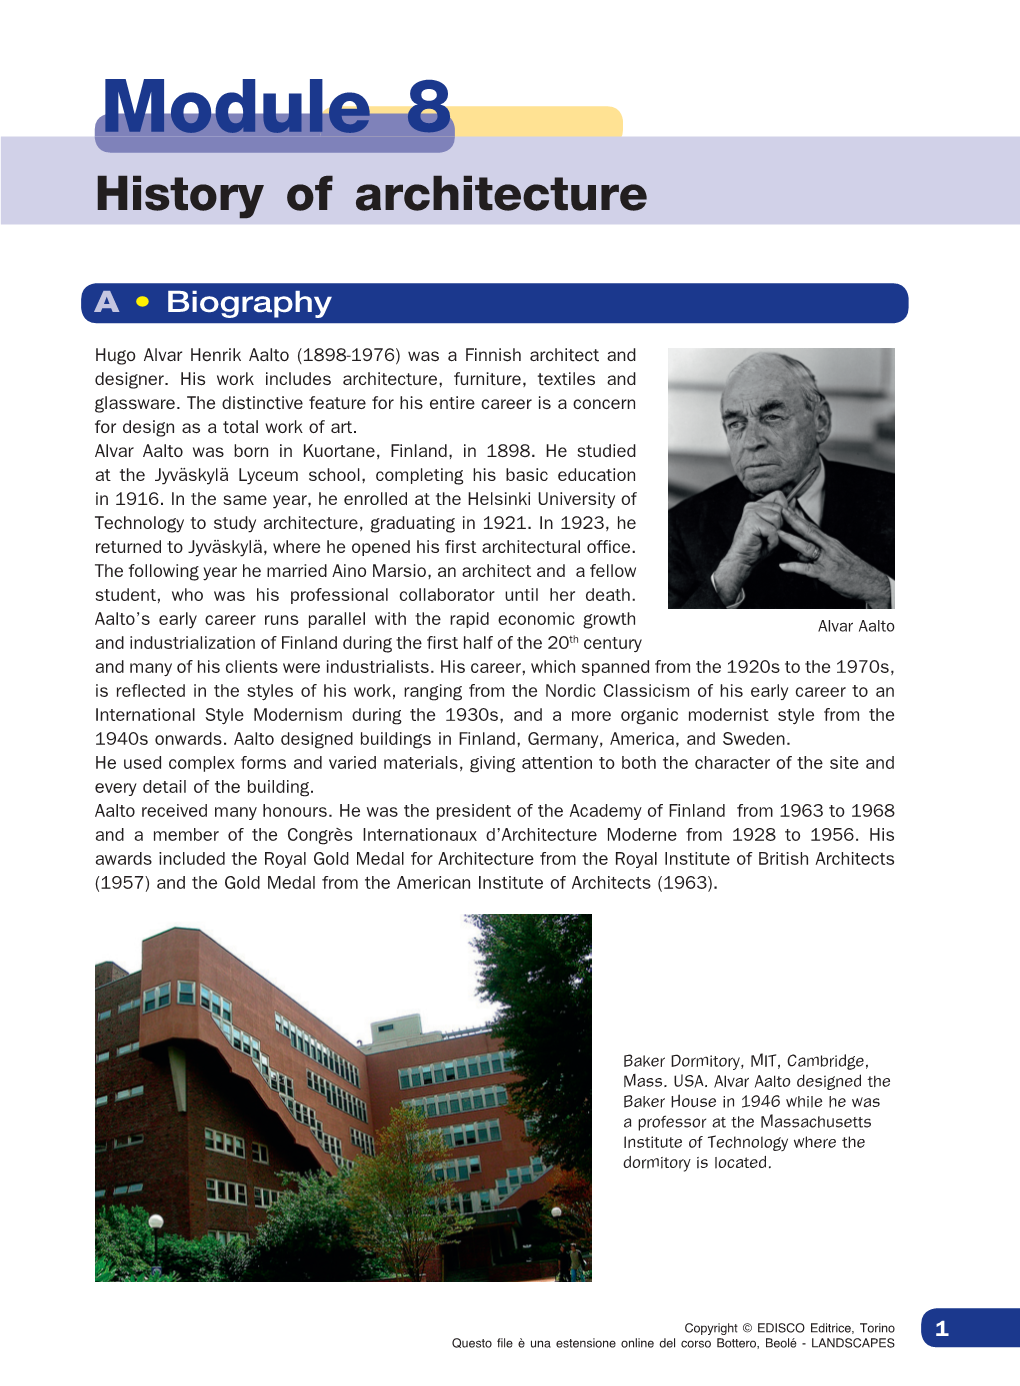 Module 8 History of Architecture